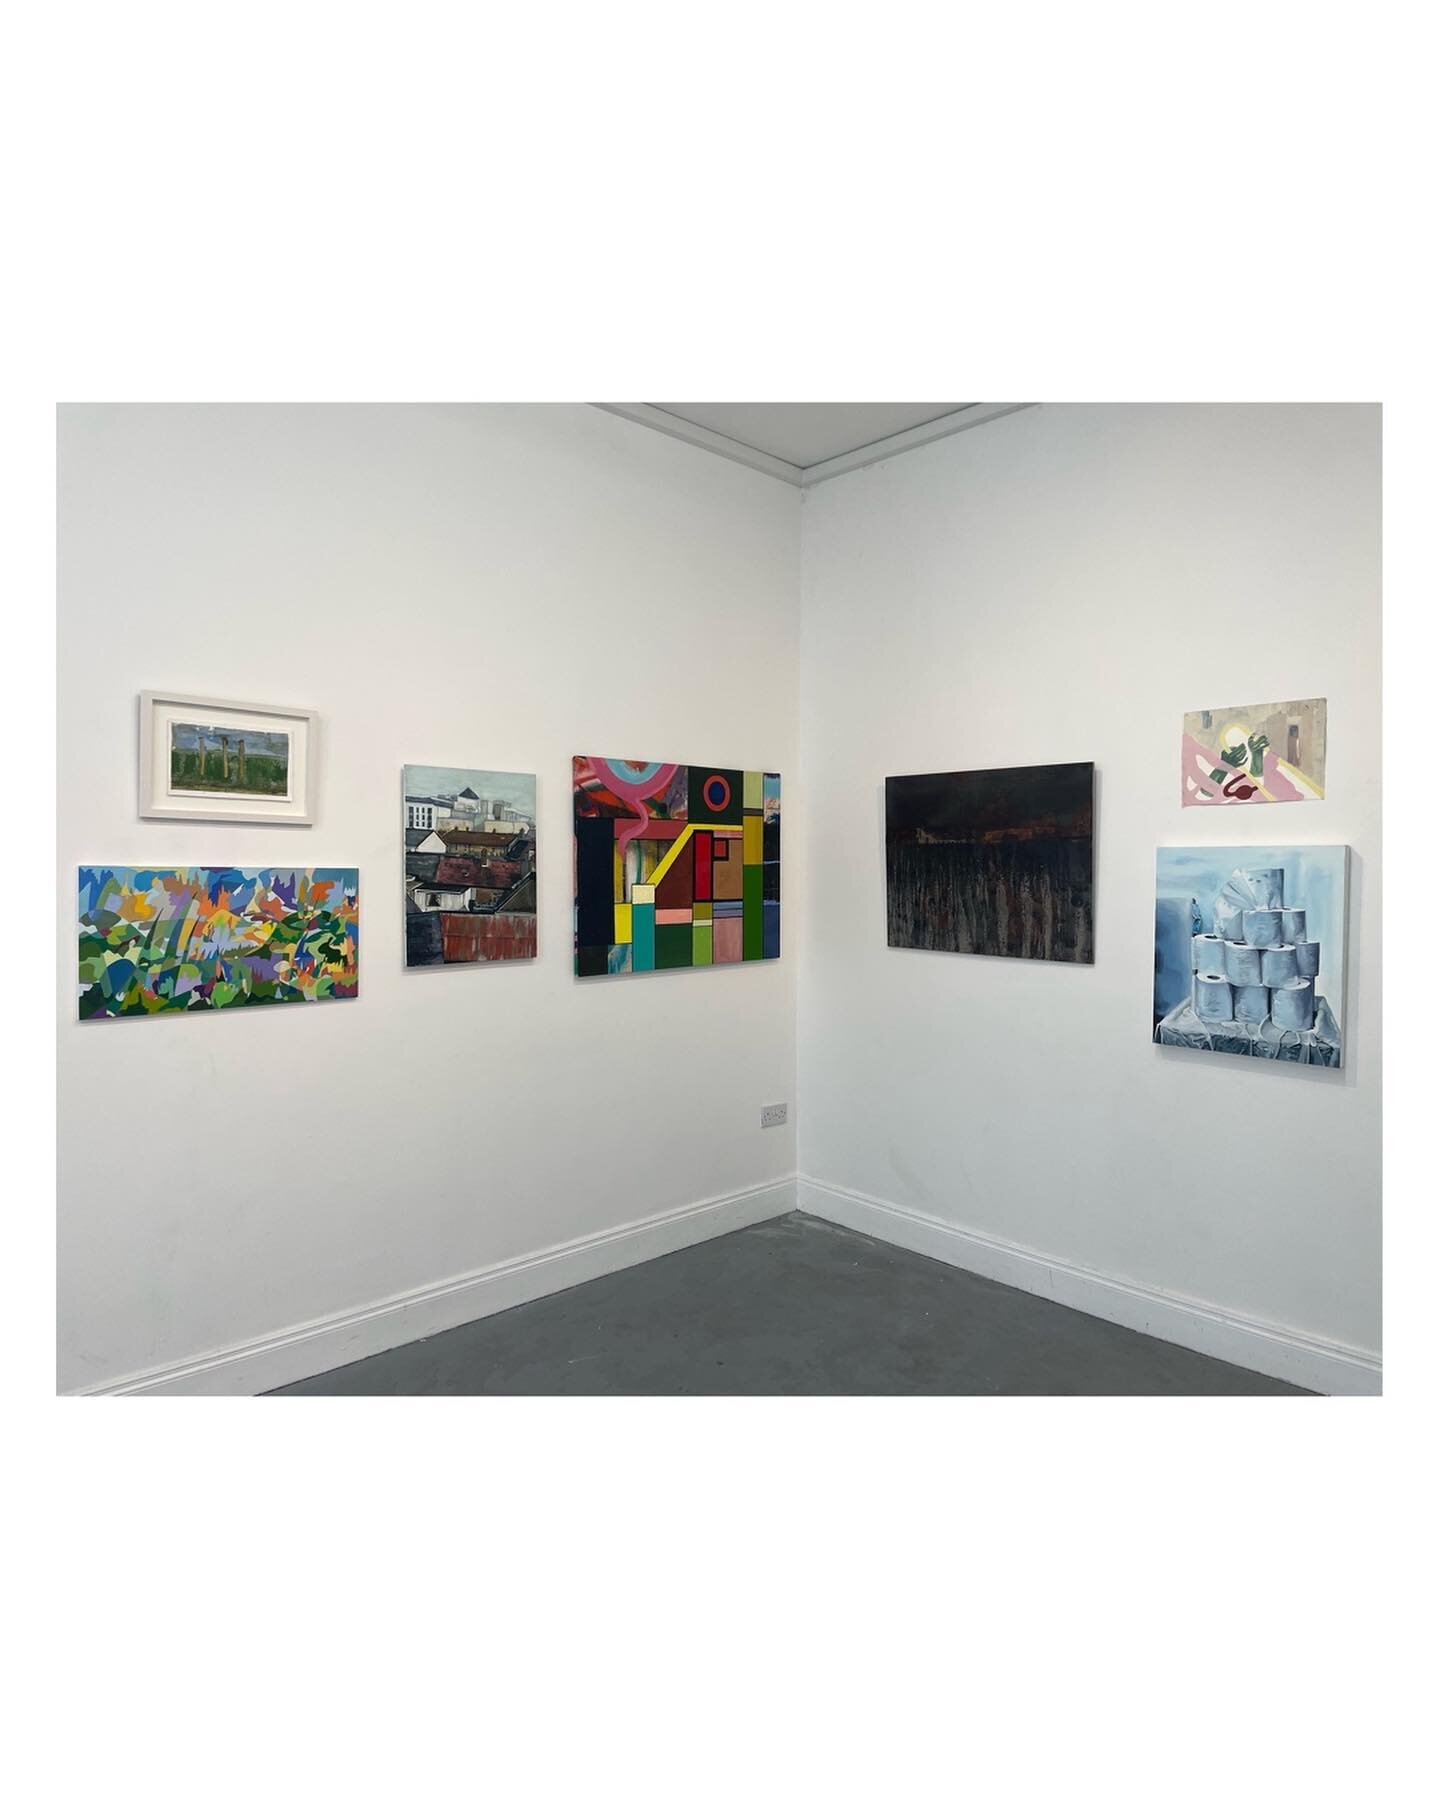 Today is the last day to see the Engage Members Show as part Galway International Arts Festival 2022. Call in to see the wonderful selection of work from 20 local artists. Open till 4pm!
@galwayintarts @joni_finnegan @vickysmith.ie @karenconway__ @st